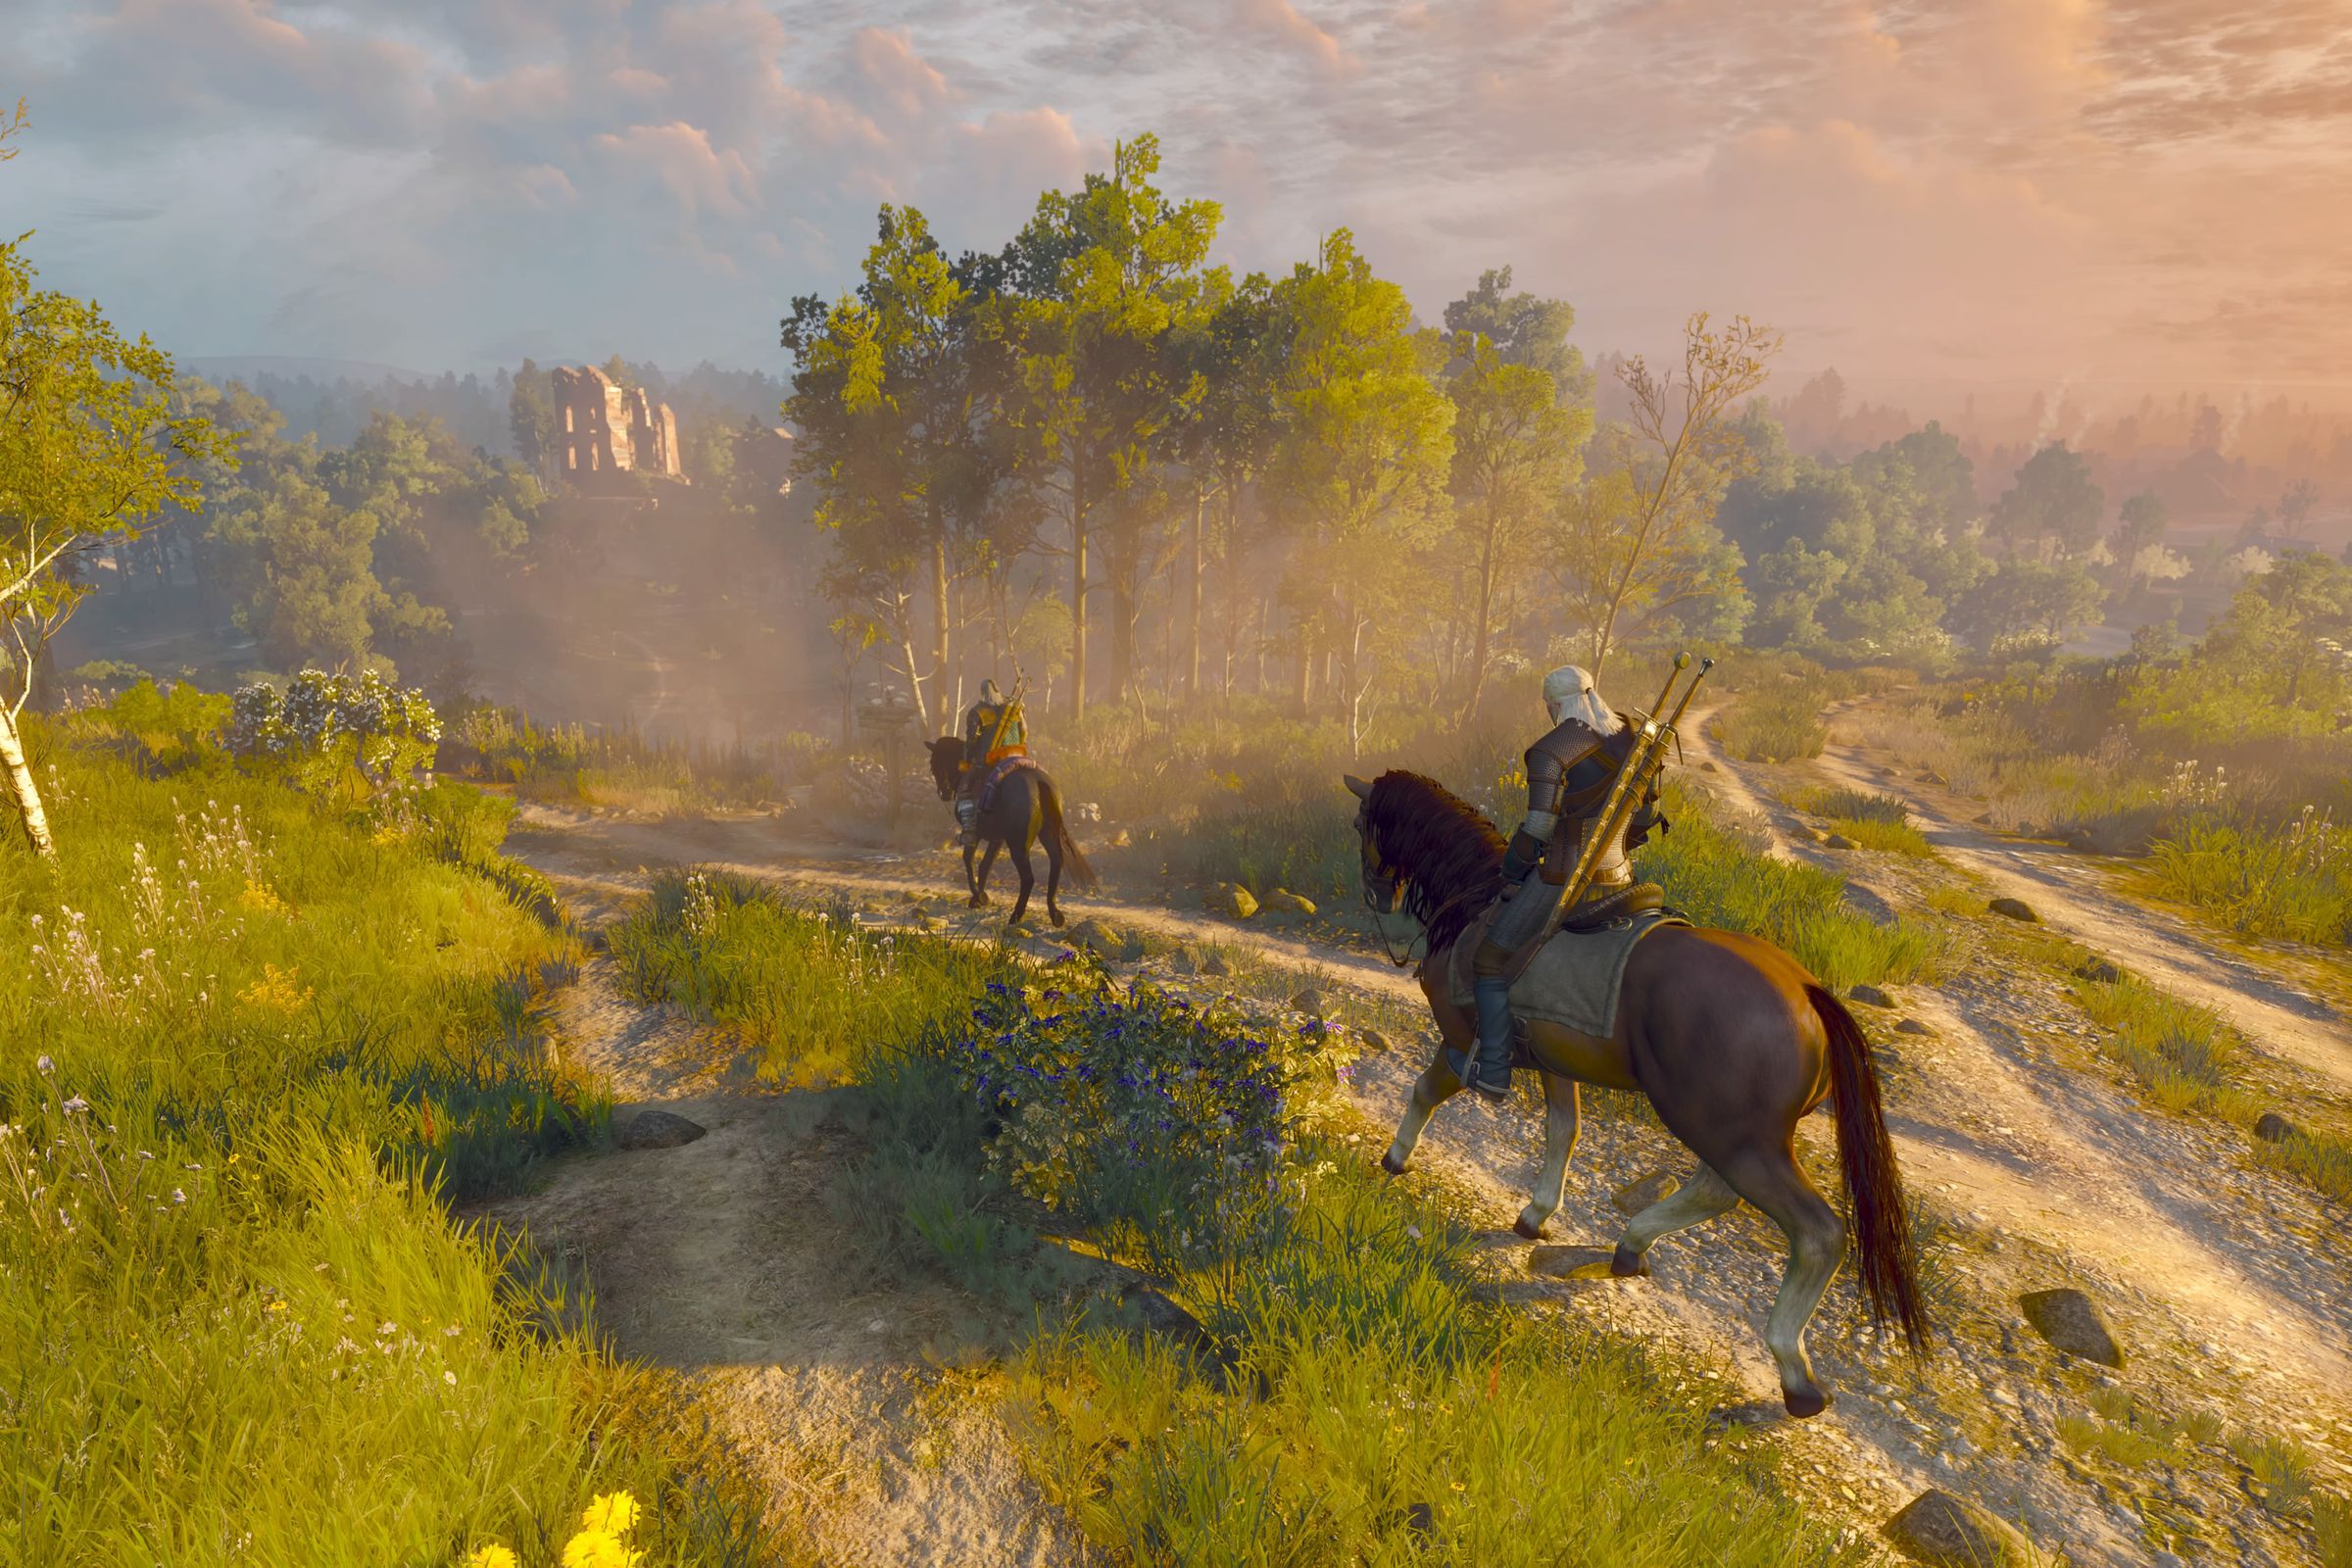 A screenshot of The Witcher 3 running on the PS5.